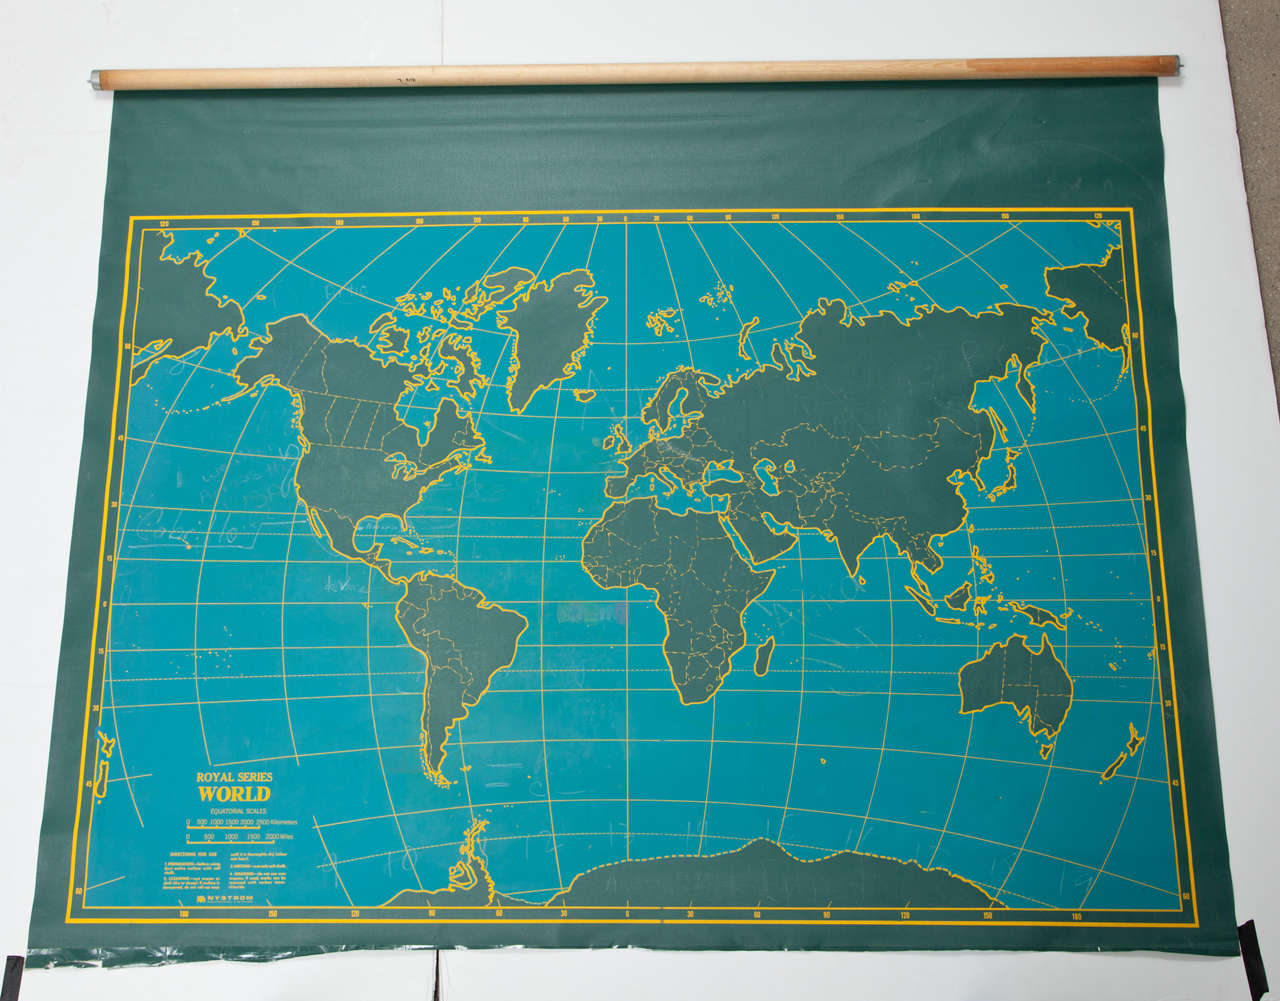 Vintage canvas roll up map by Denoyer Geppart. USA, circa 1950.  Two-sided, with the world map on one side, and the U.S.A on the second side.  Includes original roller mechanism.  Features dark green continents highlighted in gold against a blue sea.